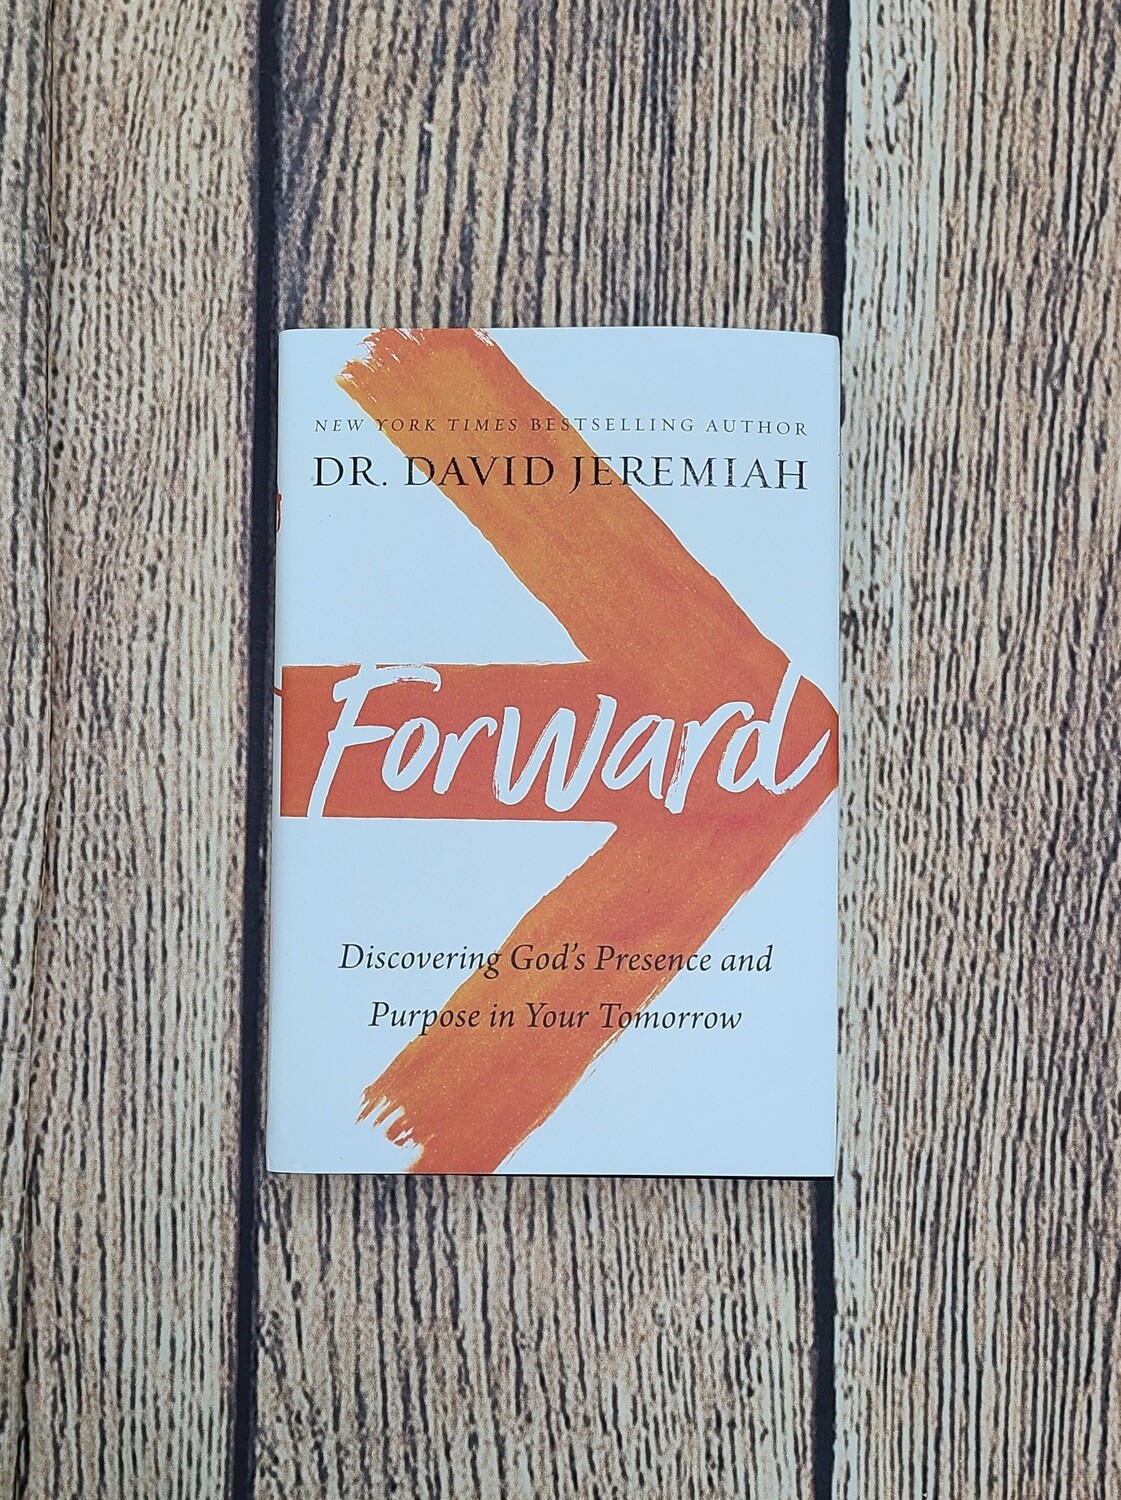 Forward: Discovering God's Presence and Purpose in Your Tomorrow by Dr. David Jeremiah